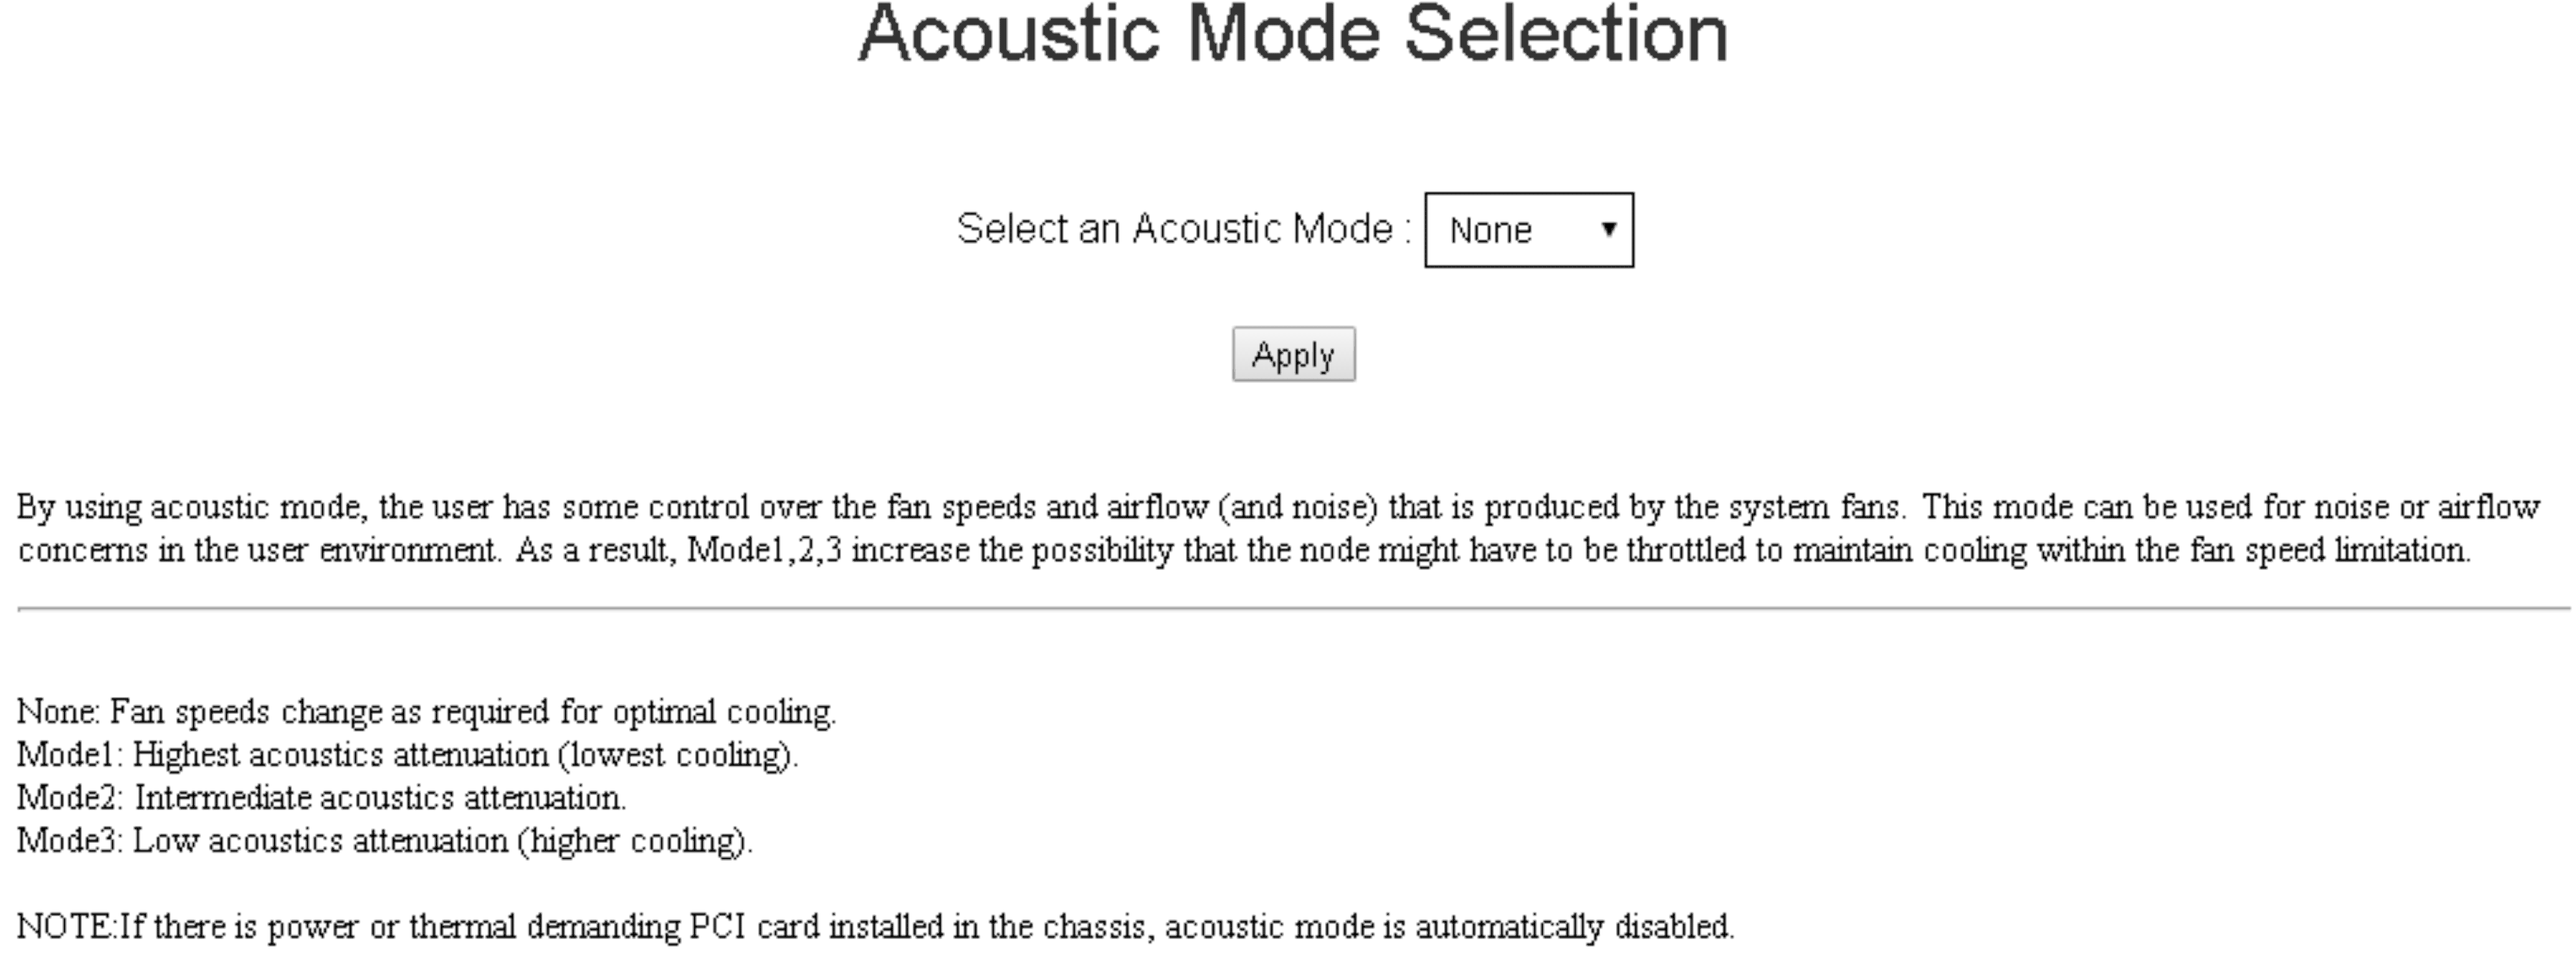 Acoustic Mode Selection